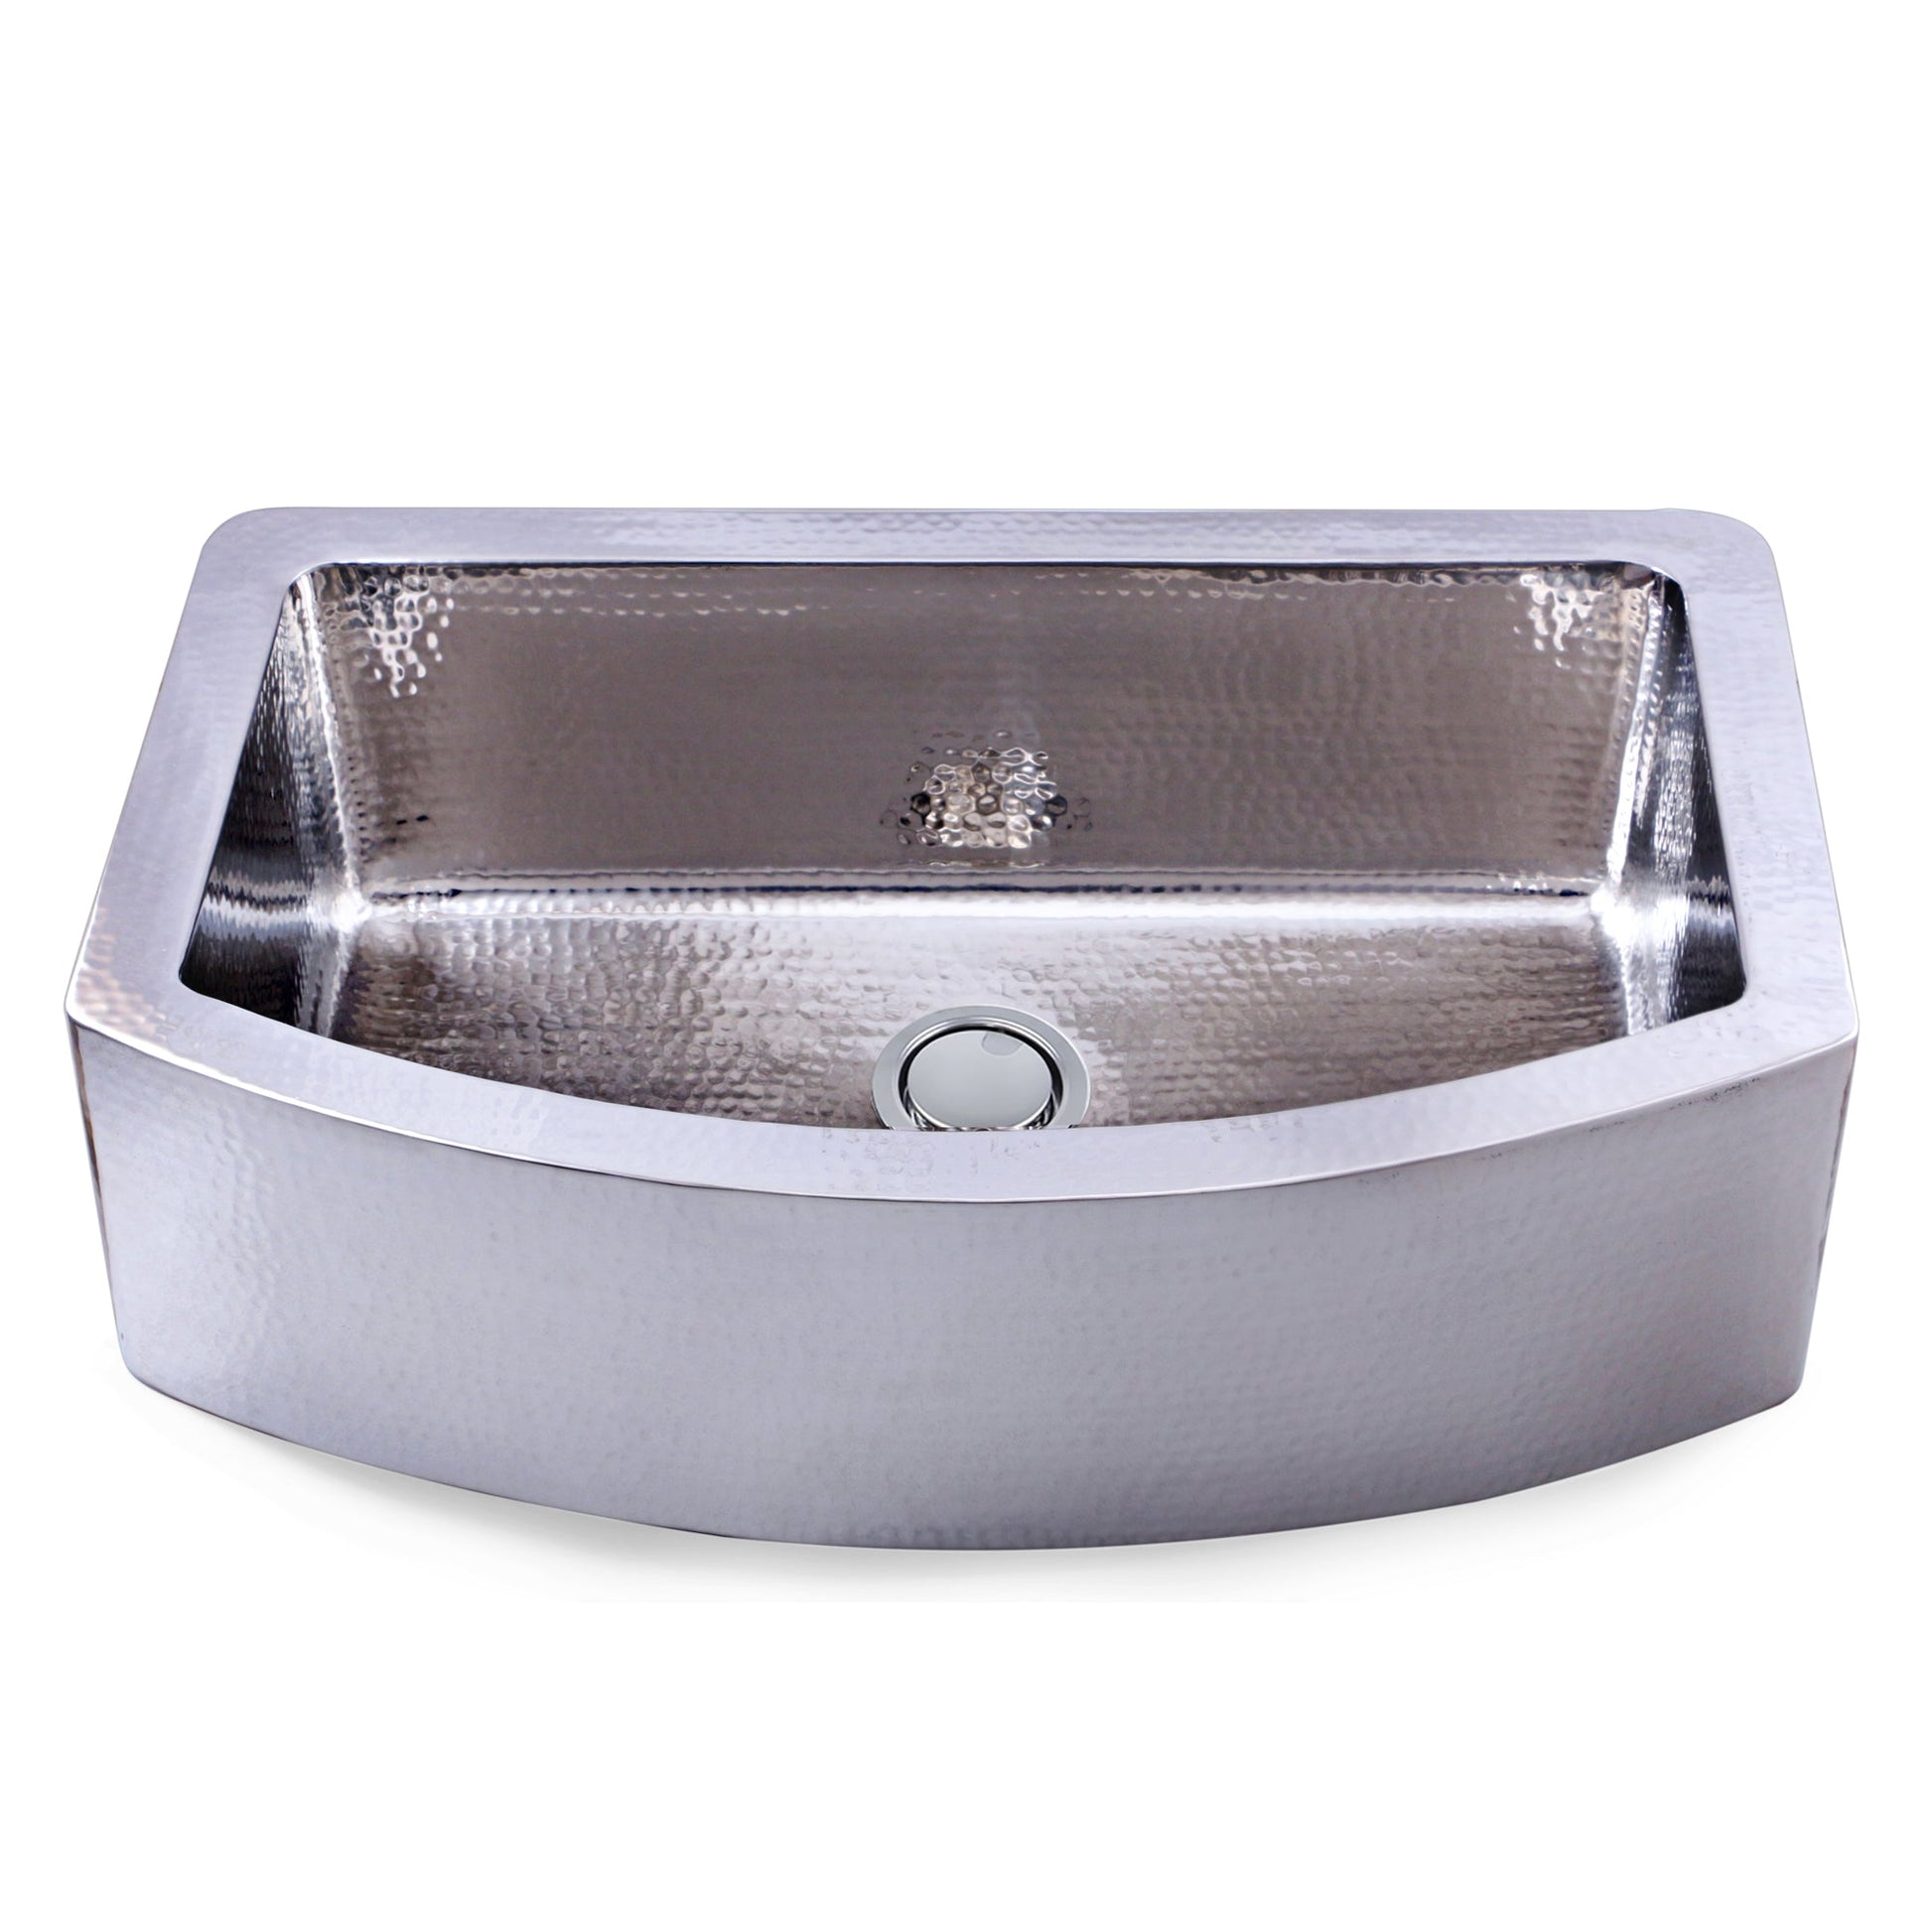 Nantucket Sinks Brightwork Home 33" Rectangle Undermount Polished Stainless Steel Single Bowl Hammered Farmhouse Apron Kitchen Sink